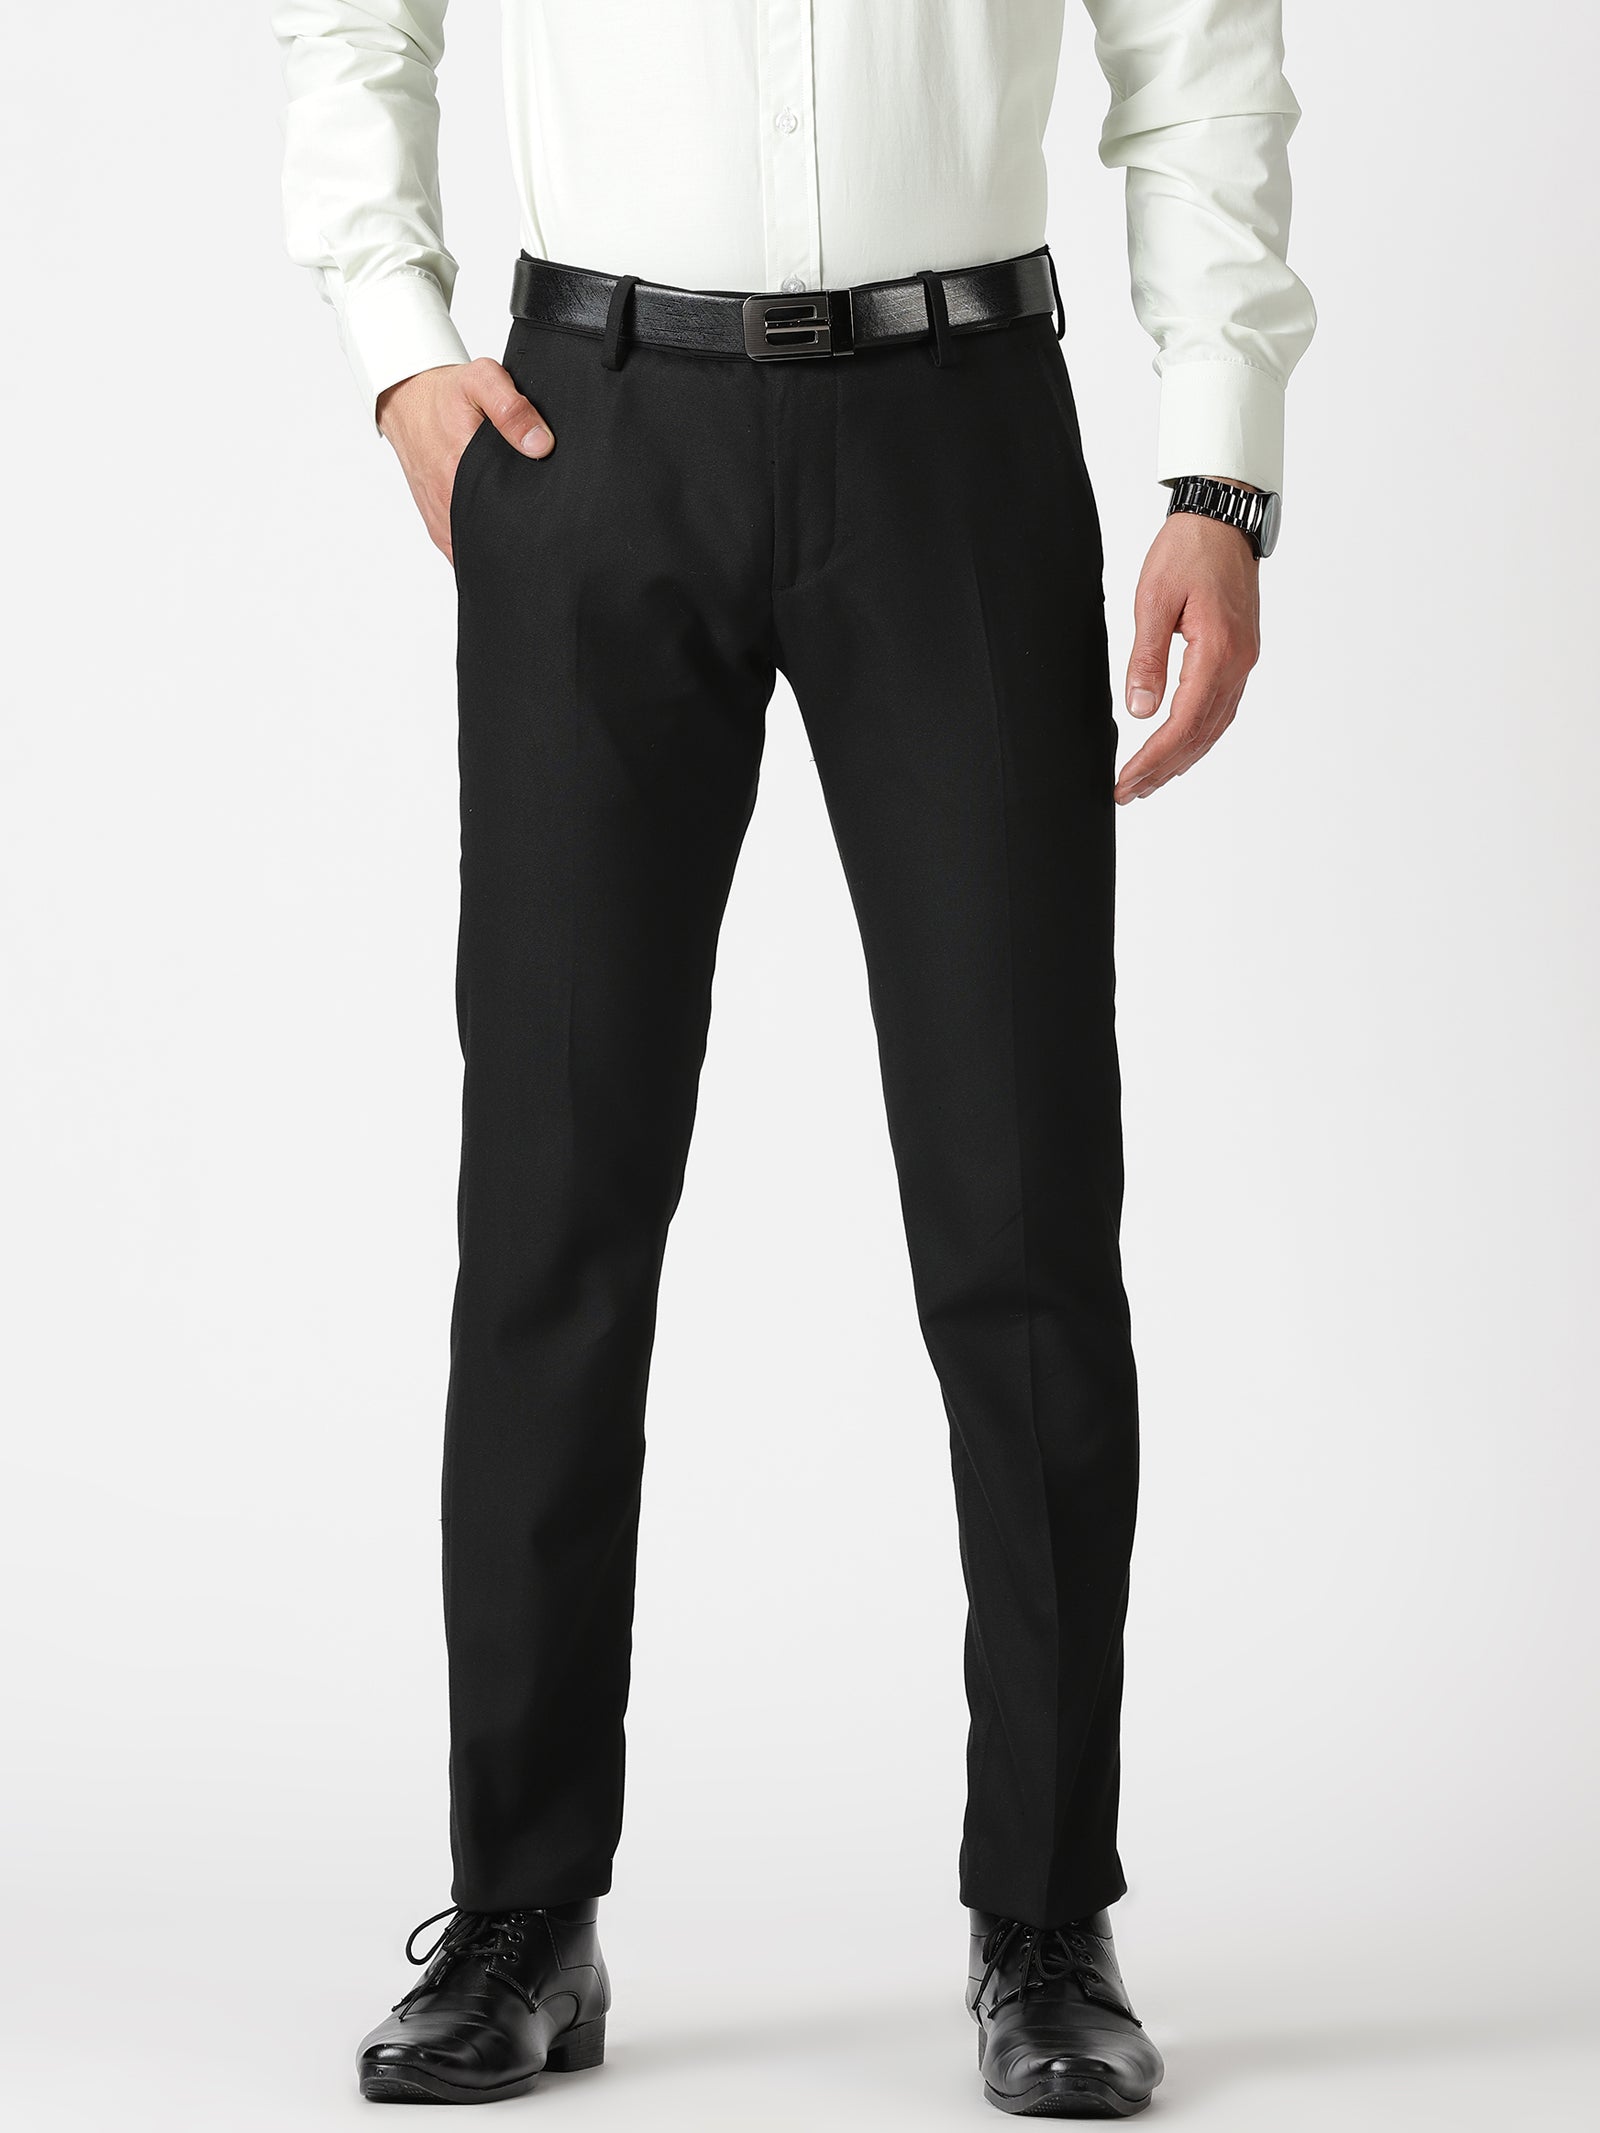 Buy LP ATHWORK Black Checks Cotton Nylon Tapered Fit Mens Work Wear  Trousers  Shoppers Stop